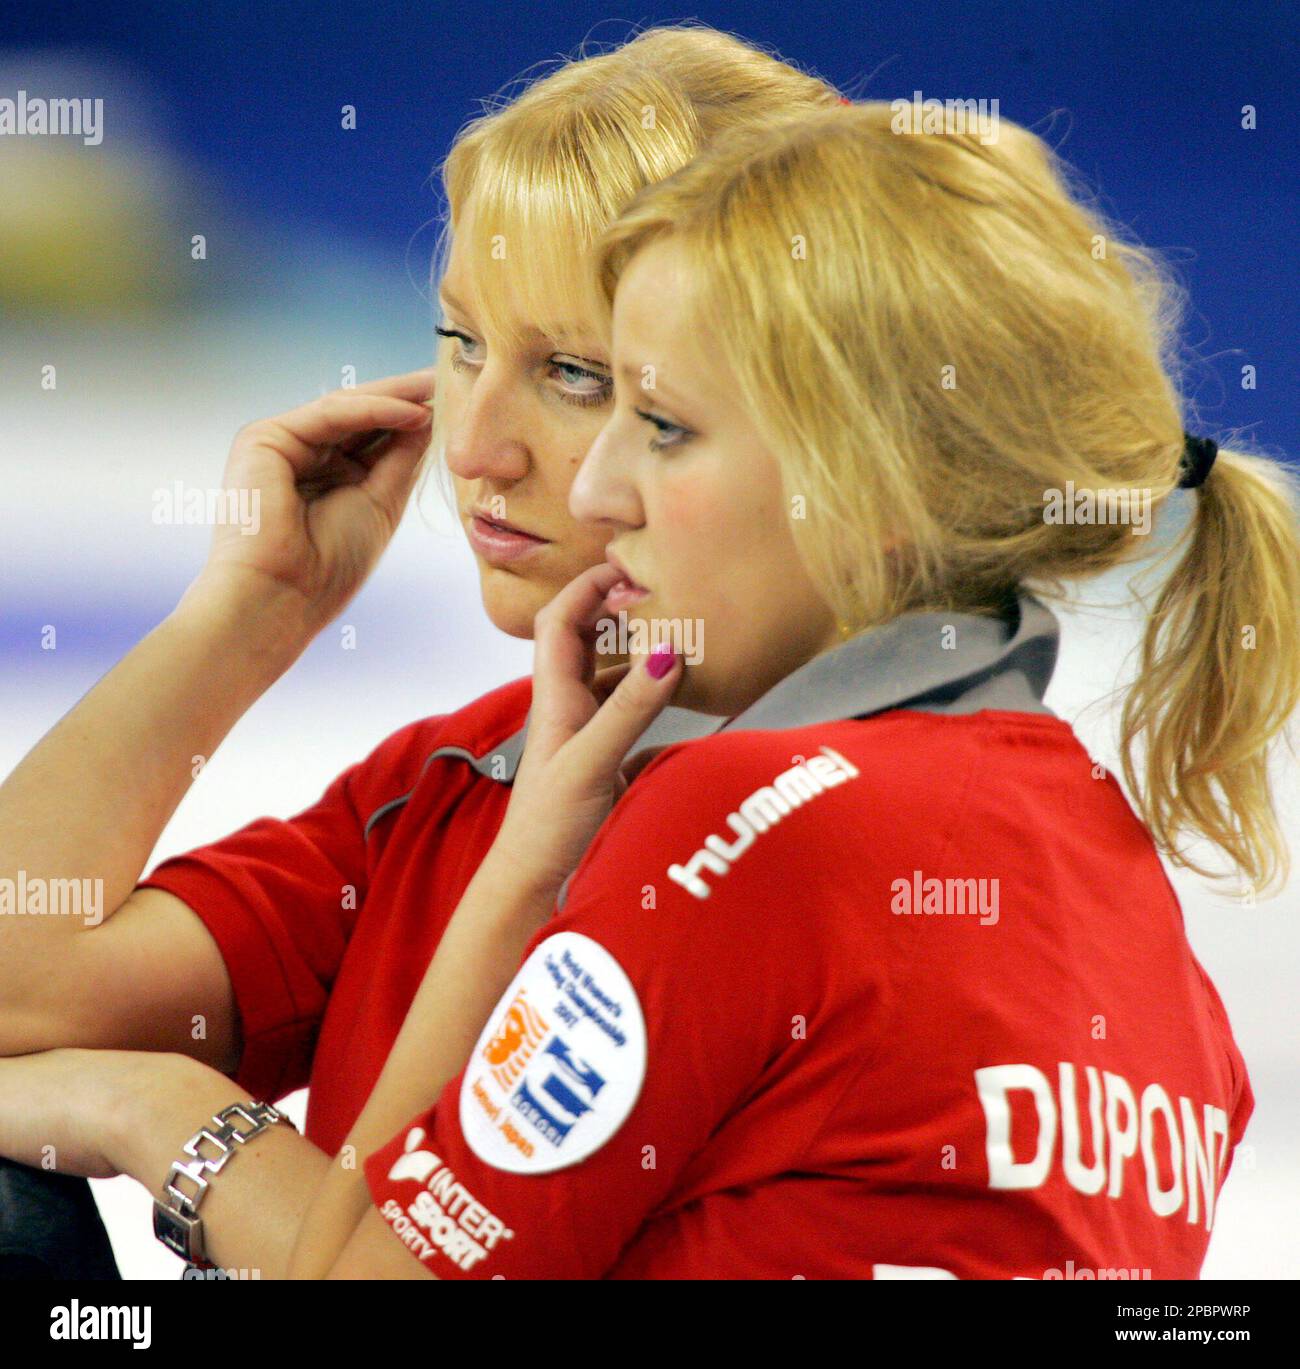 Team Denmarks Denise Dupont, left, and Madeleine Dupont watch a stone during their play off match against Canada at the Womens World Curling Championship, in Aomori, northern Japan Saturday, March 24, 2007